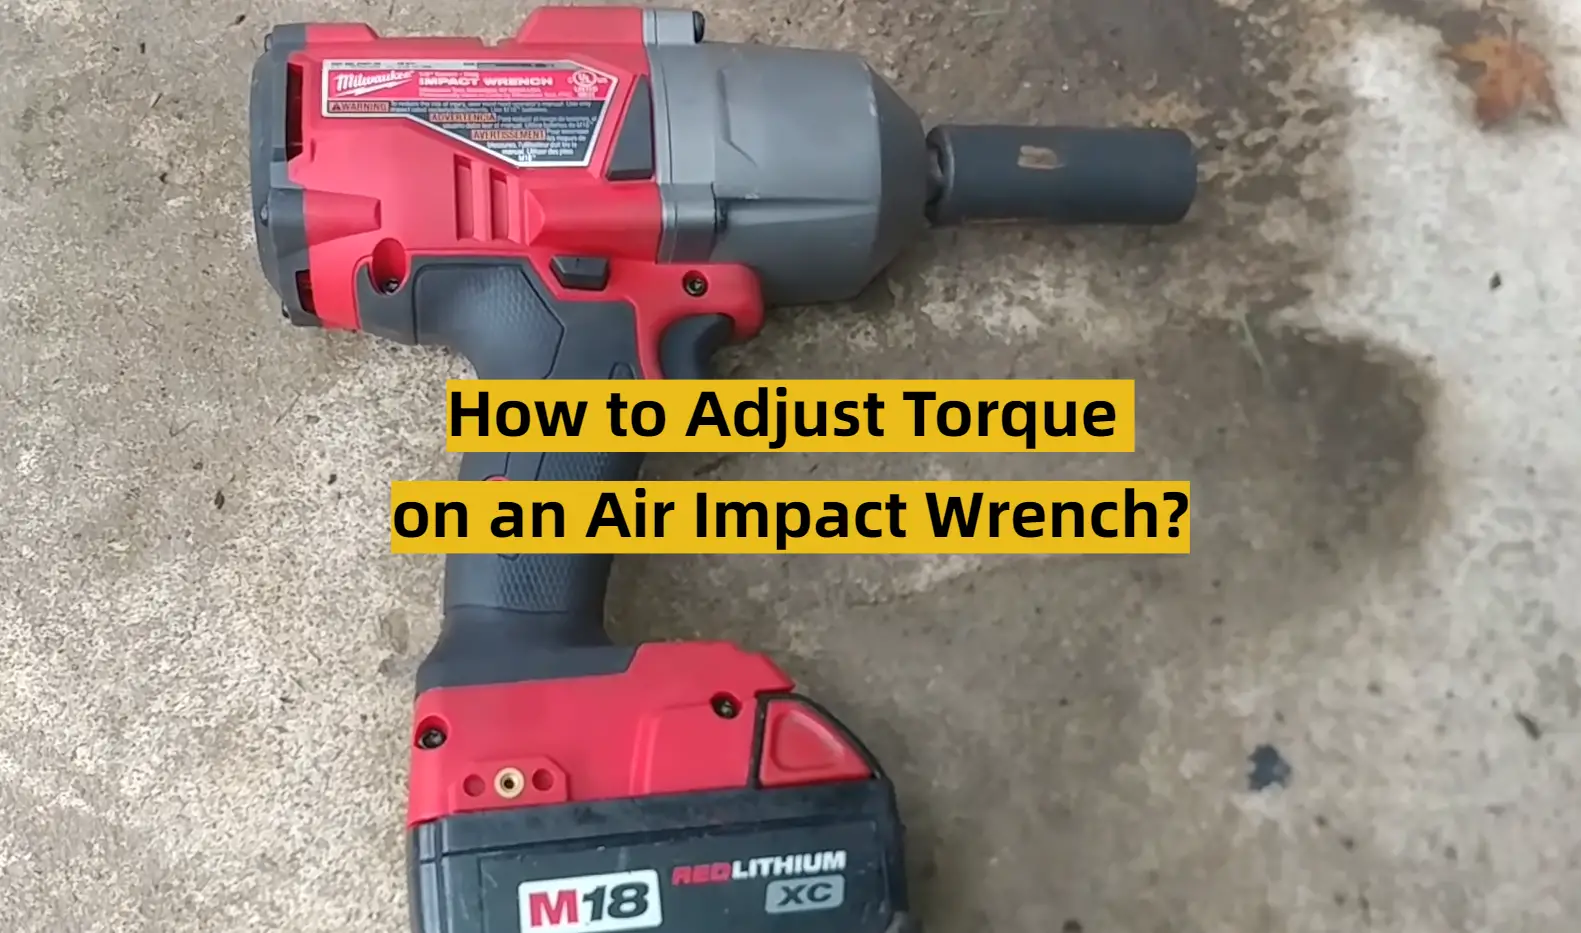 How to Adjust Torque on an Air Impact Wrench?